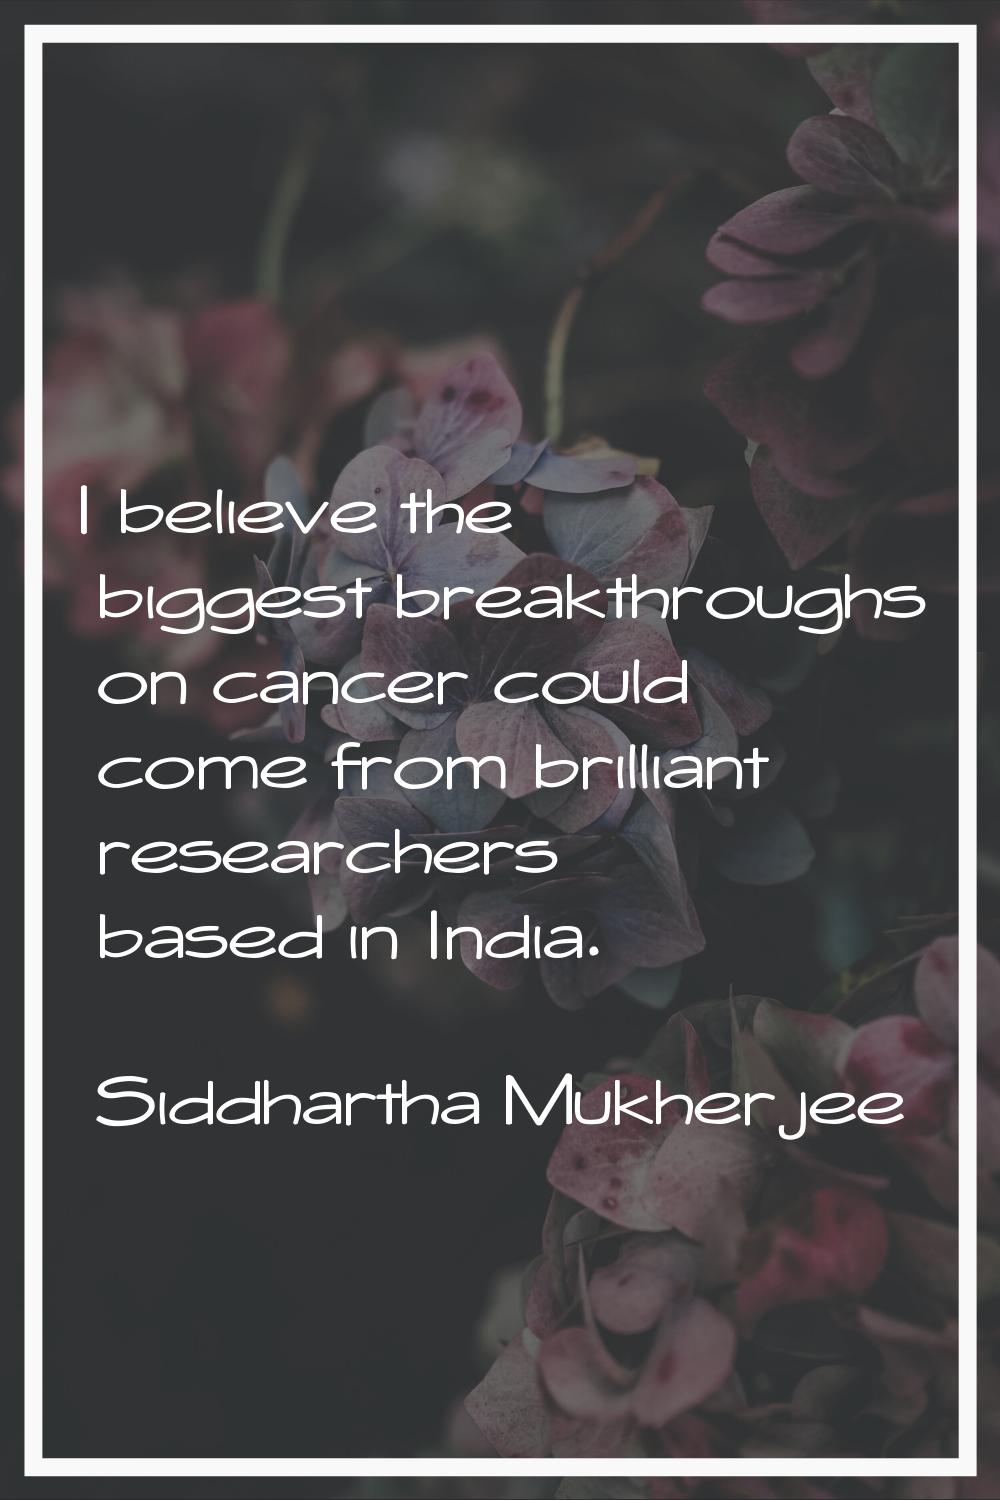 I believe the biggest breakthroughs on cancer could come from brilliant researchers based in India.